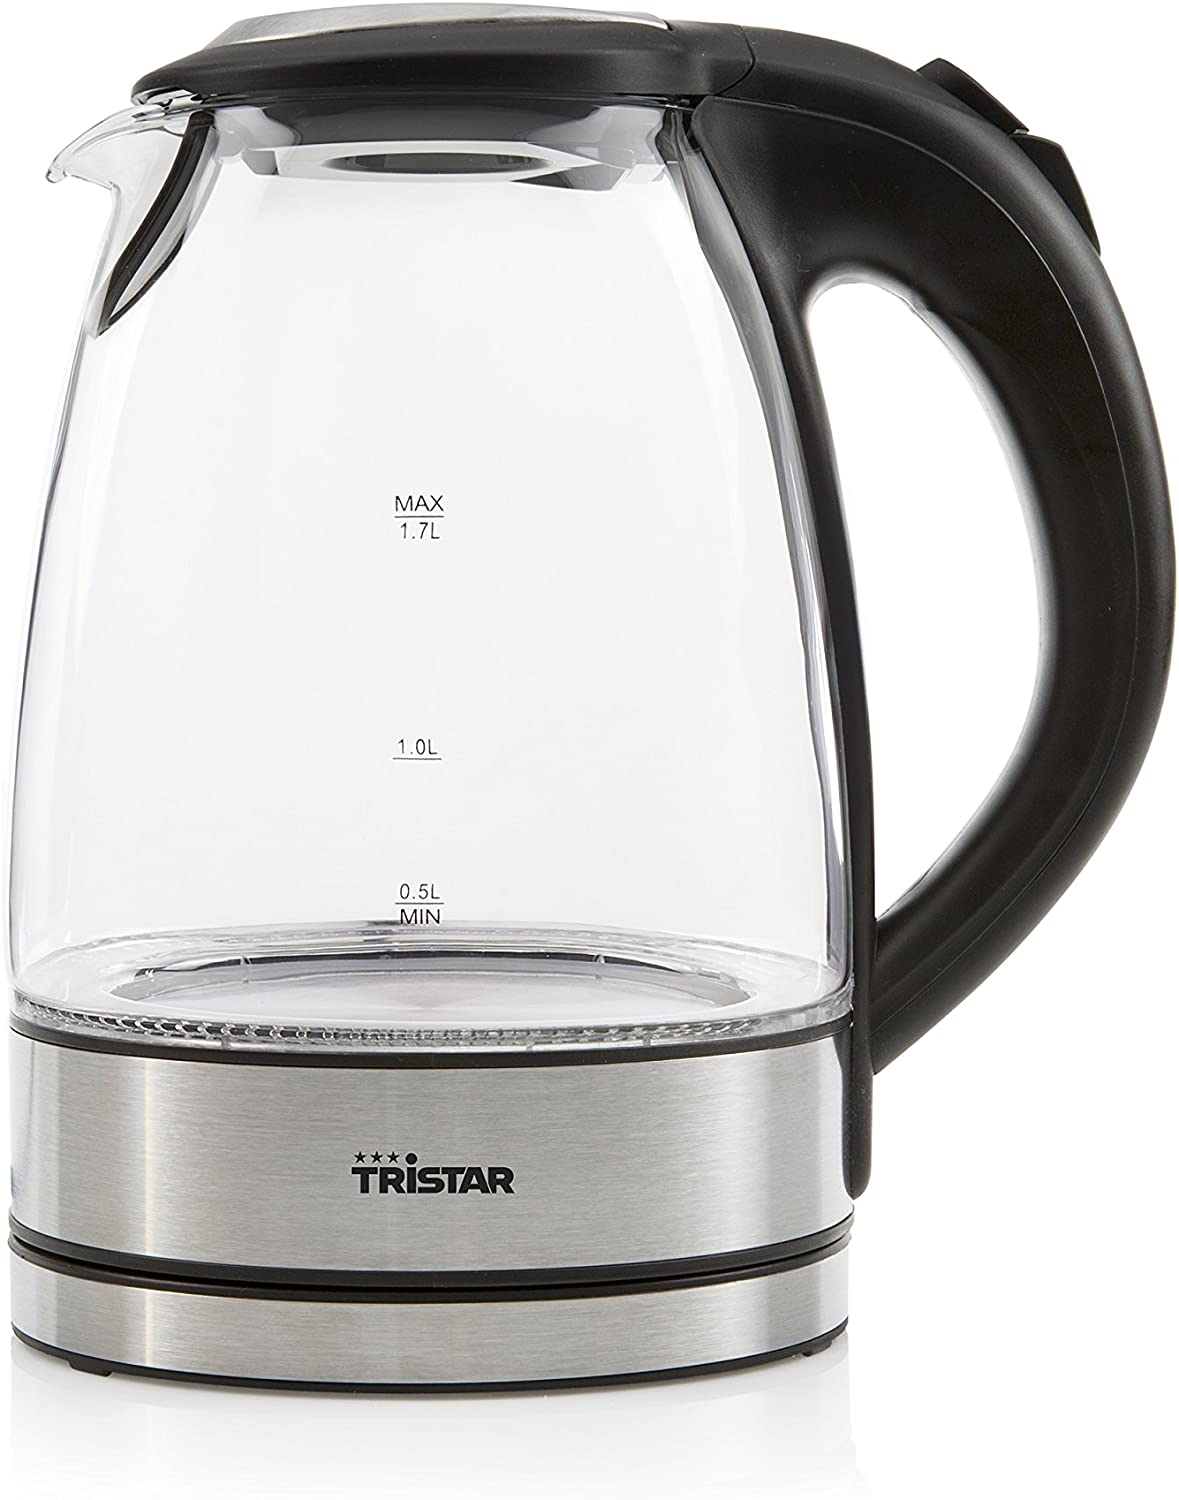 Tristar Kettle (stainless steel and glass) with 1.7 litre capacity - 360° rotatable with water level indicator, WK-3377